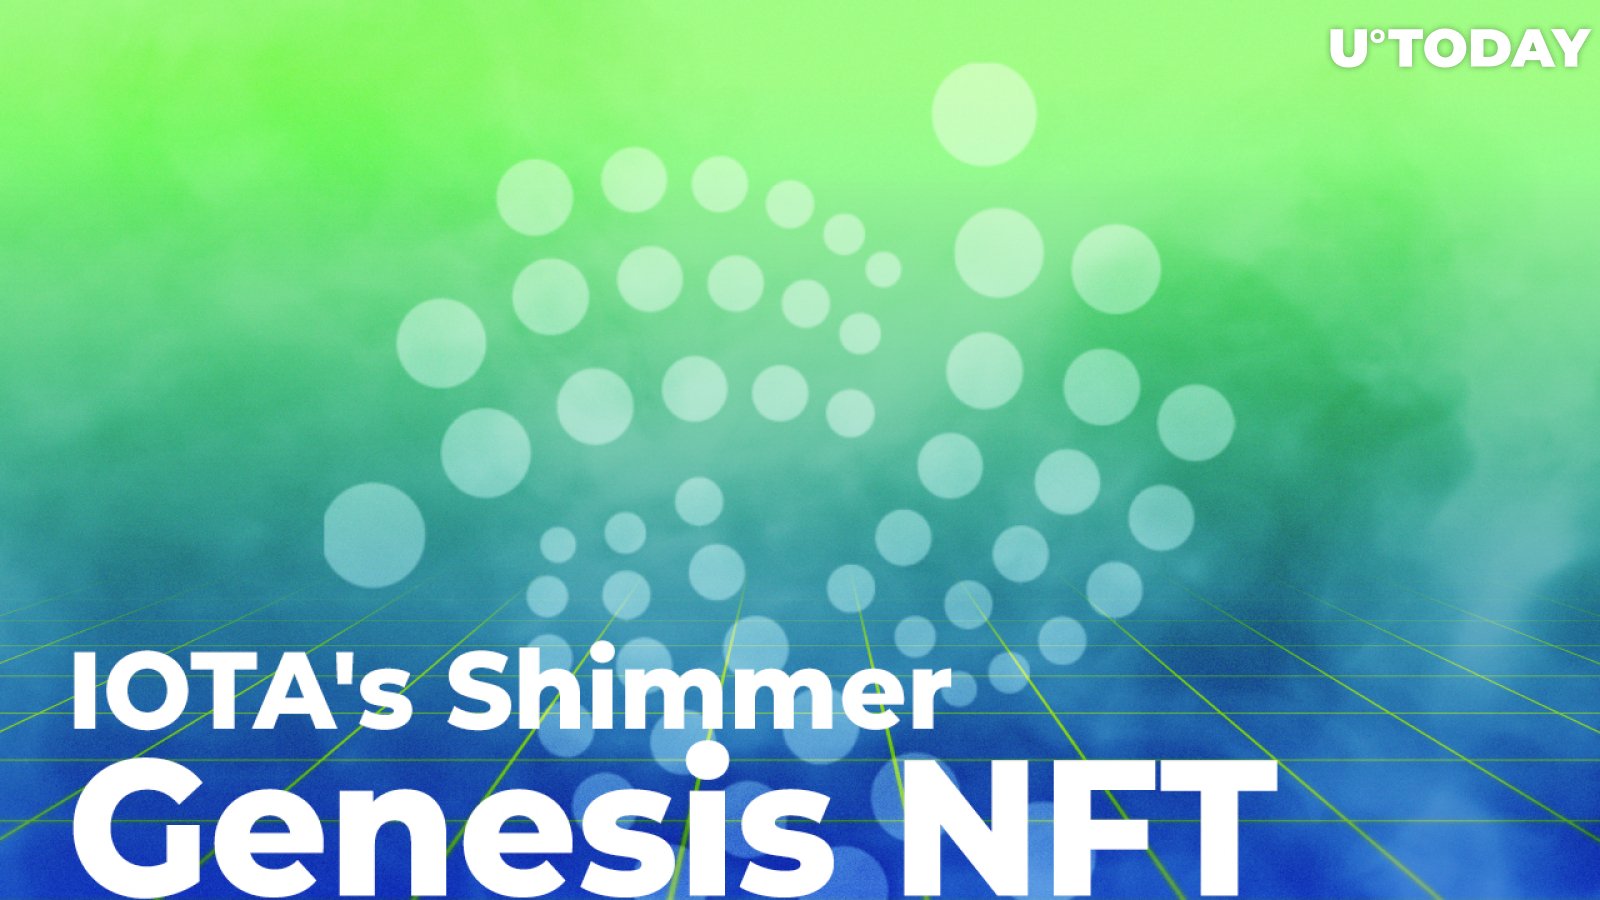 IOTA's Shimmer Network Receives First Genesis NFT Collection